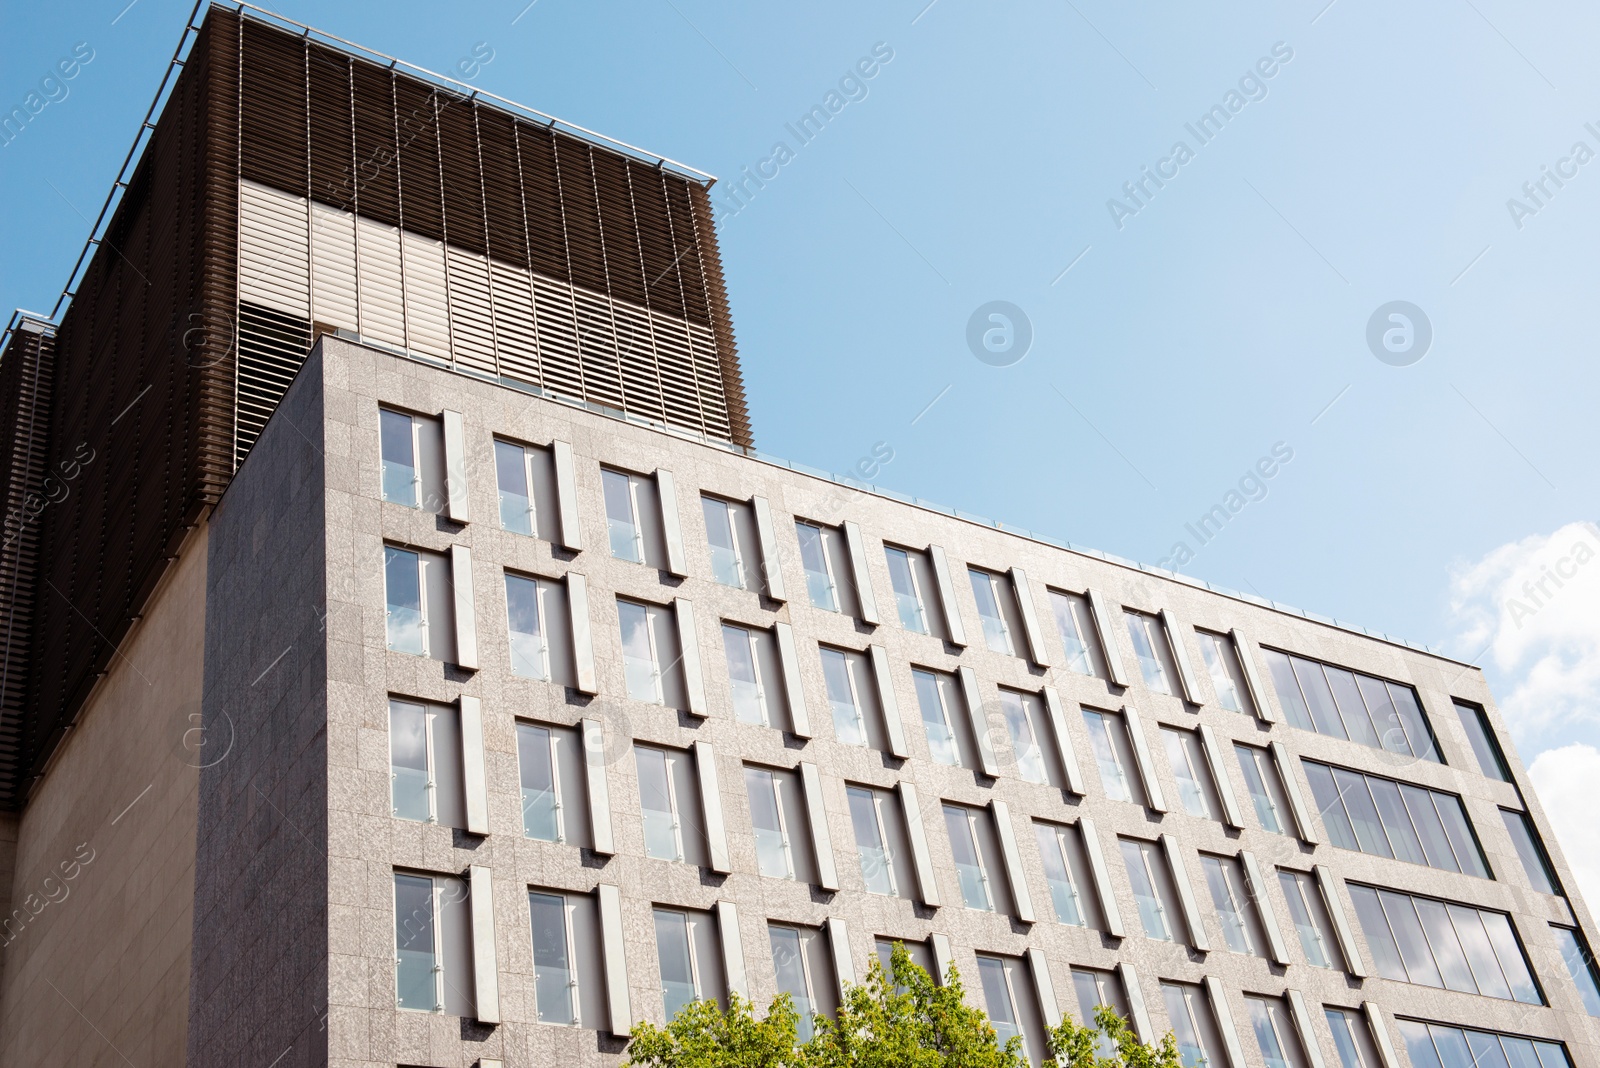 Photo of Modern building with windows on sunny day, low angle view